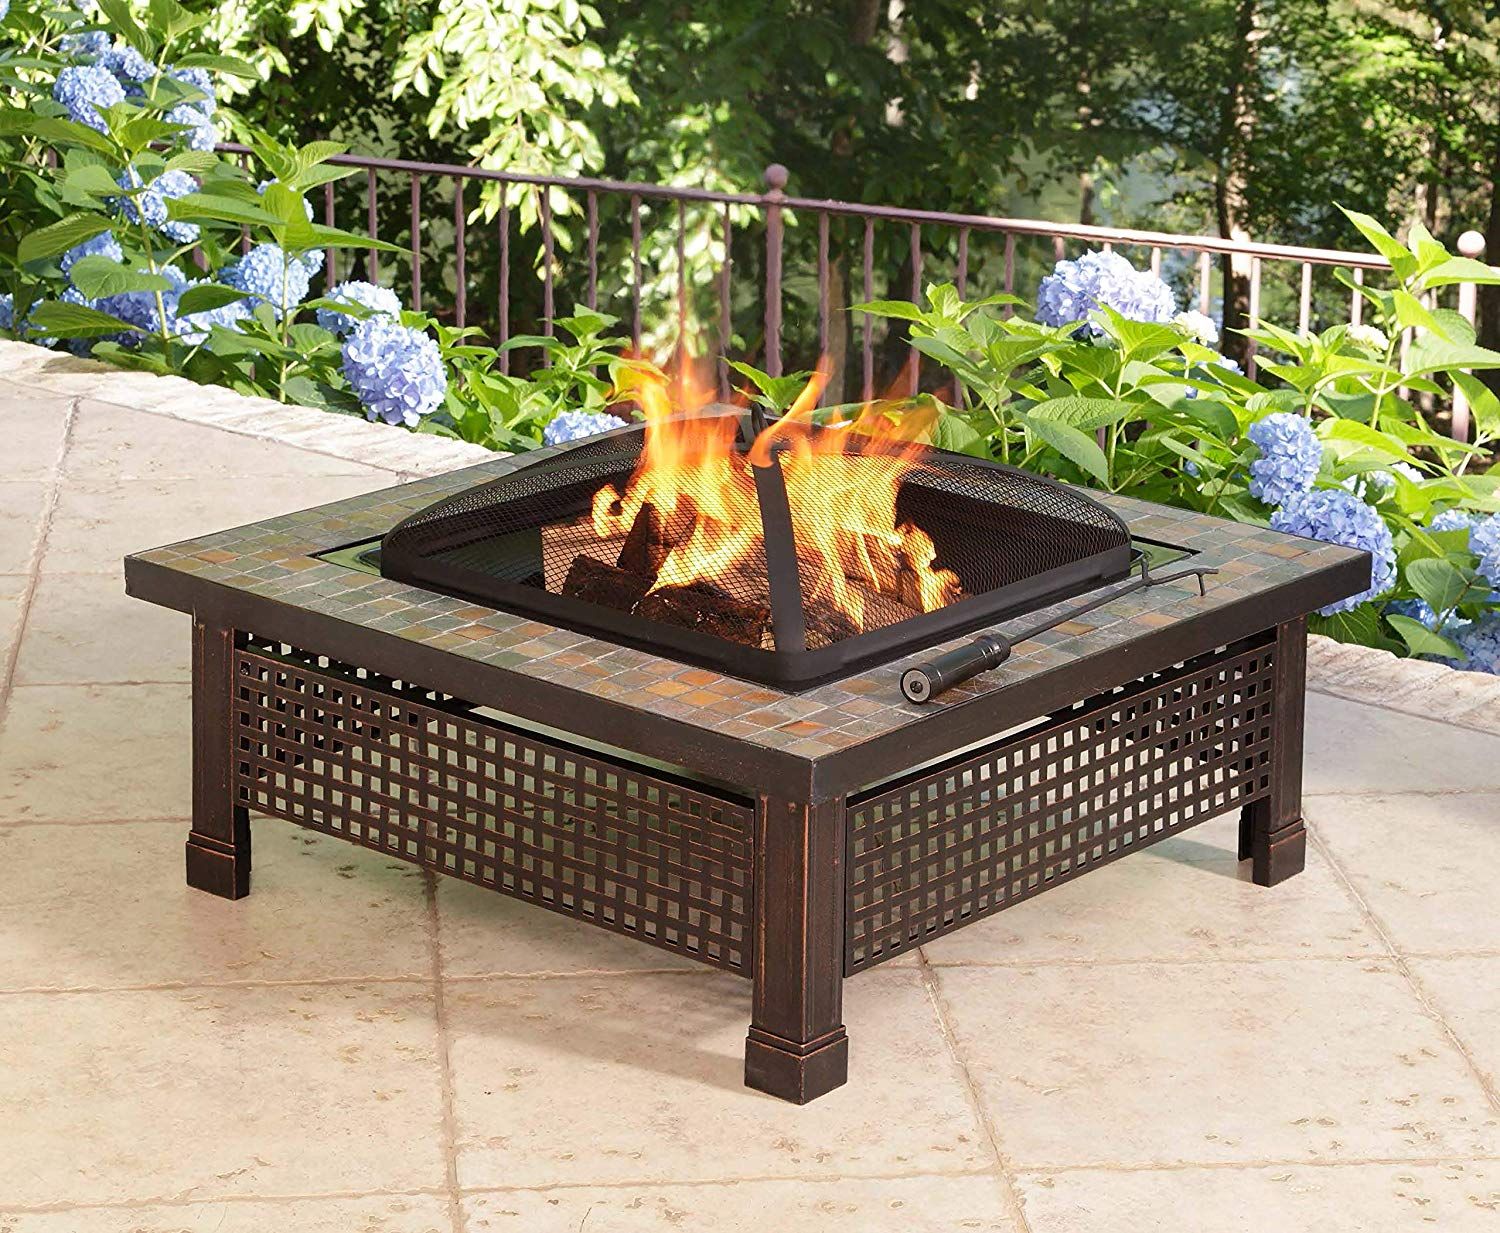 11 Best Outdoor Fire Pit Ideas To Diy Or Buy Building Backyard Fire Pits